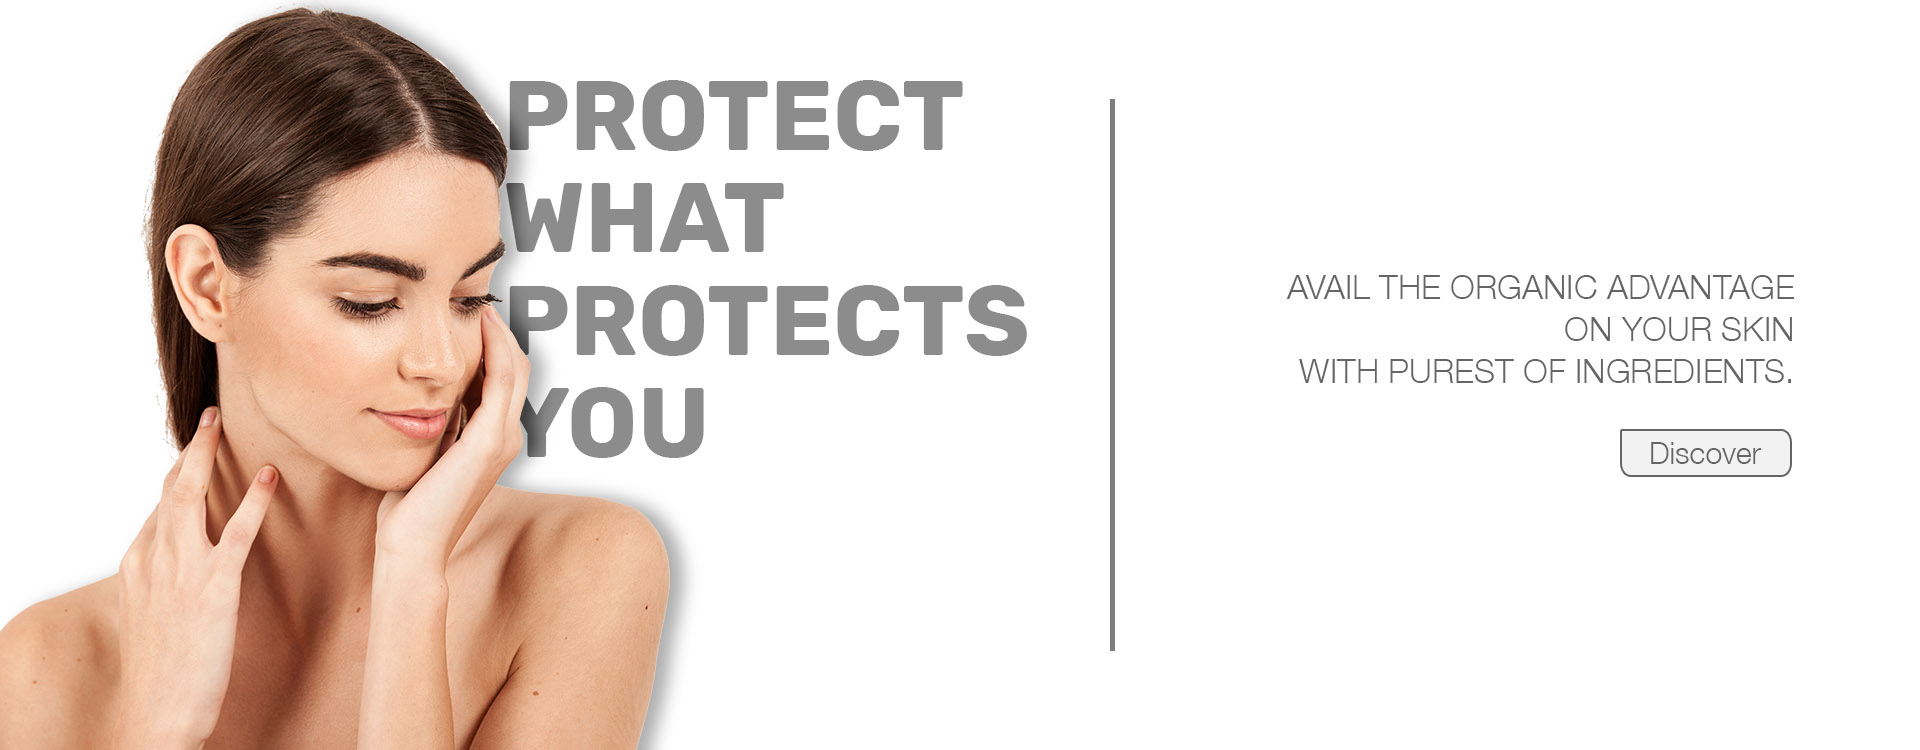 Protect What Protects You - Skin Care